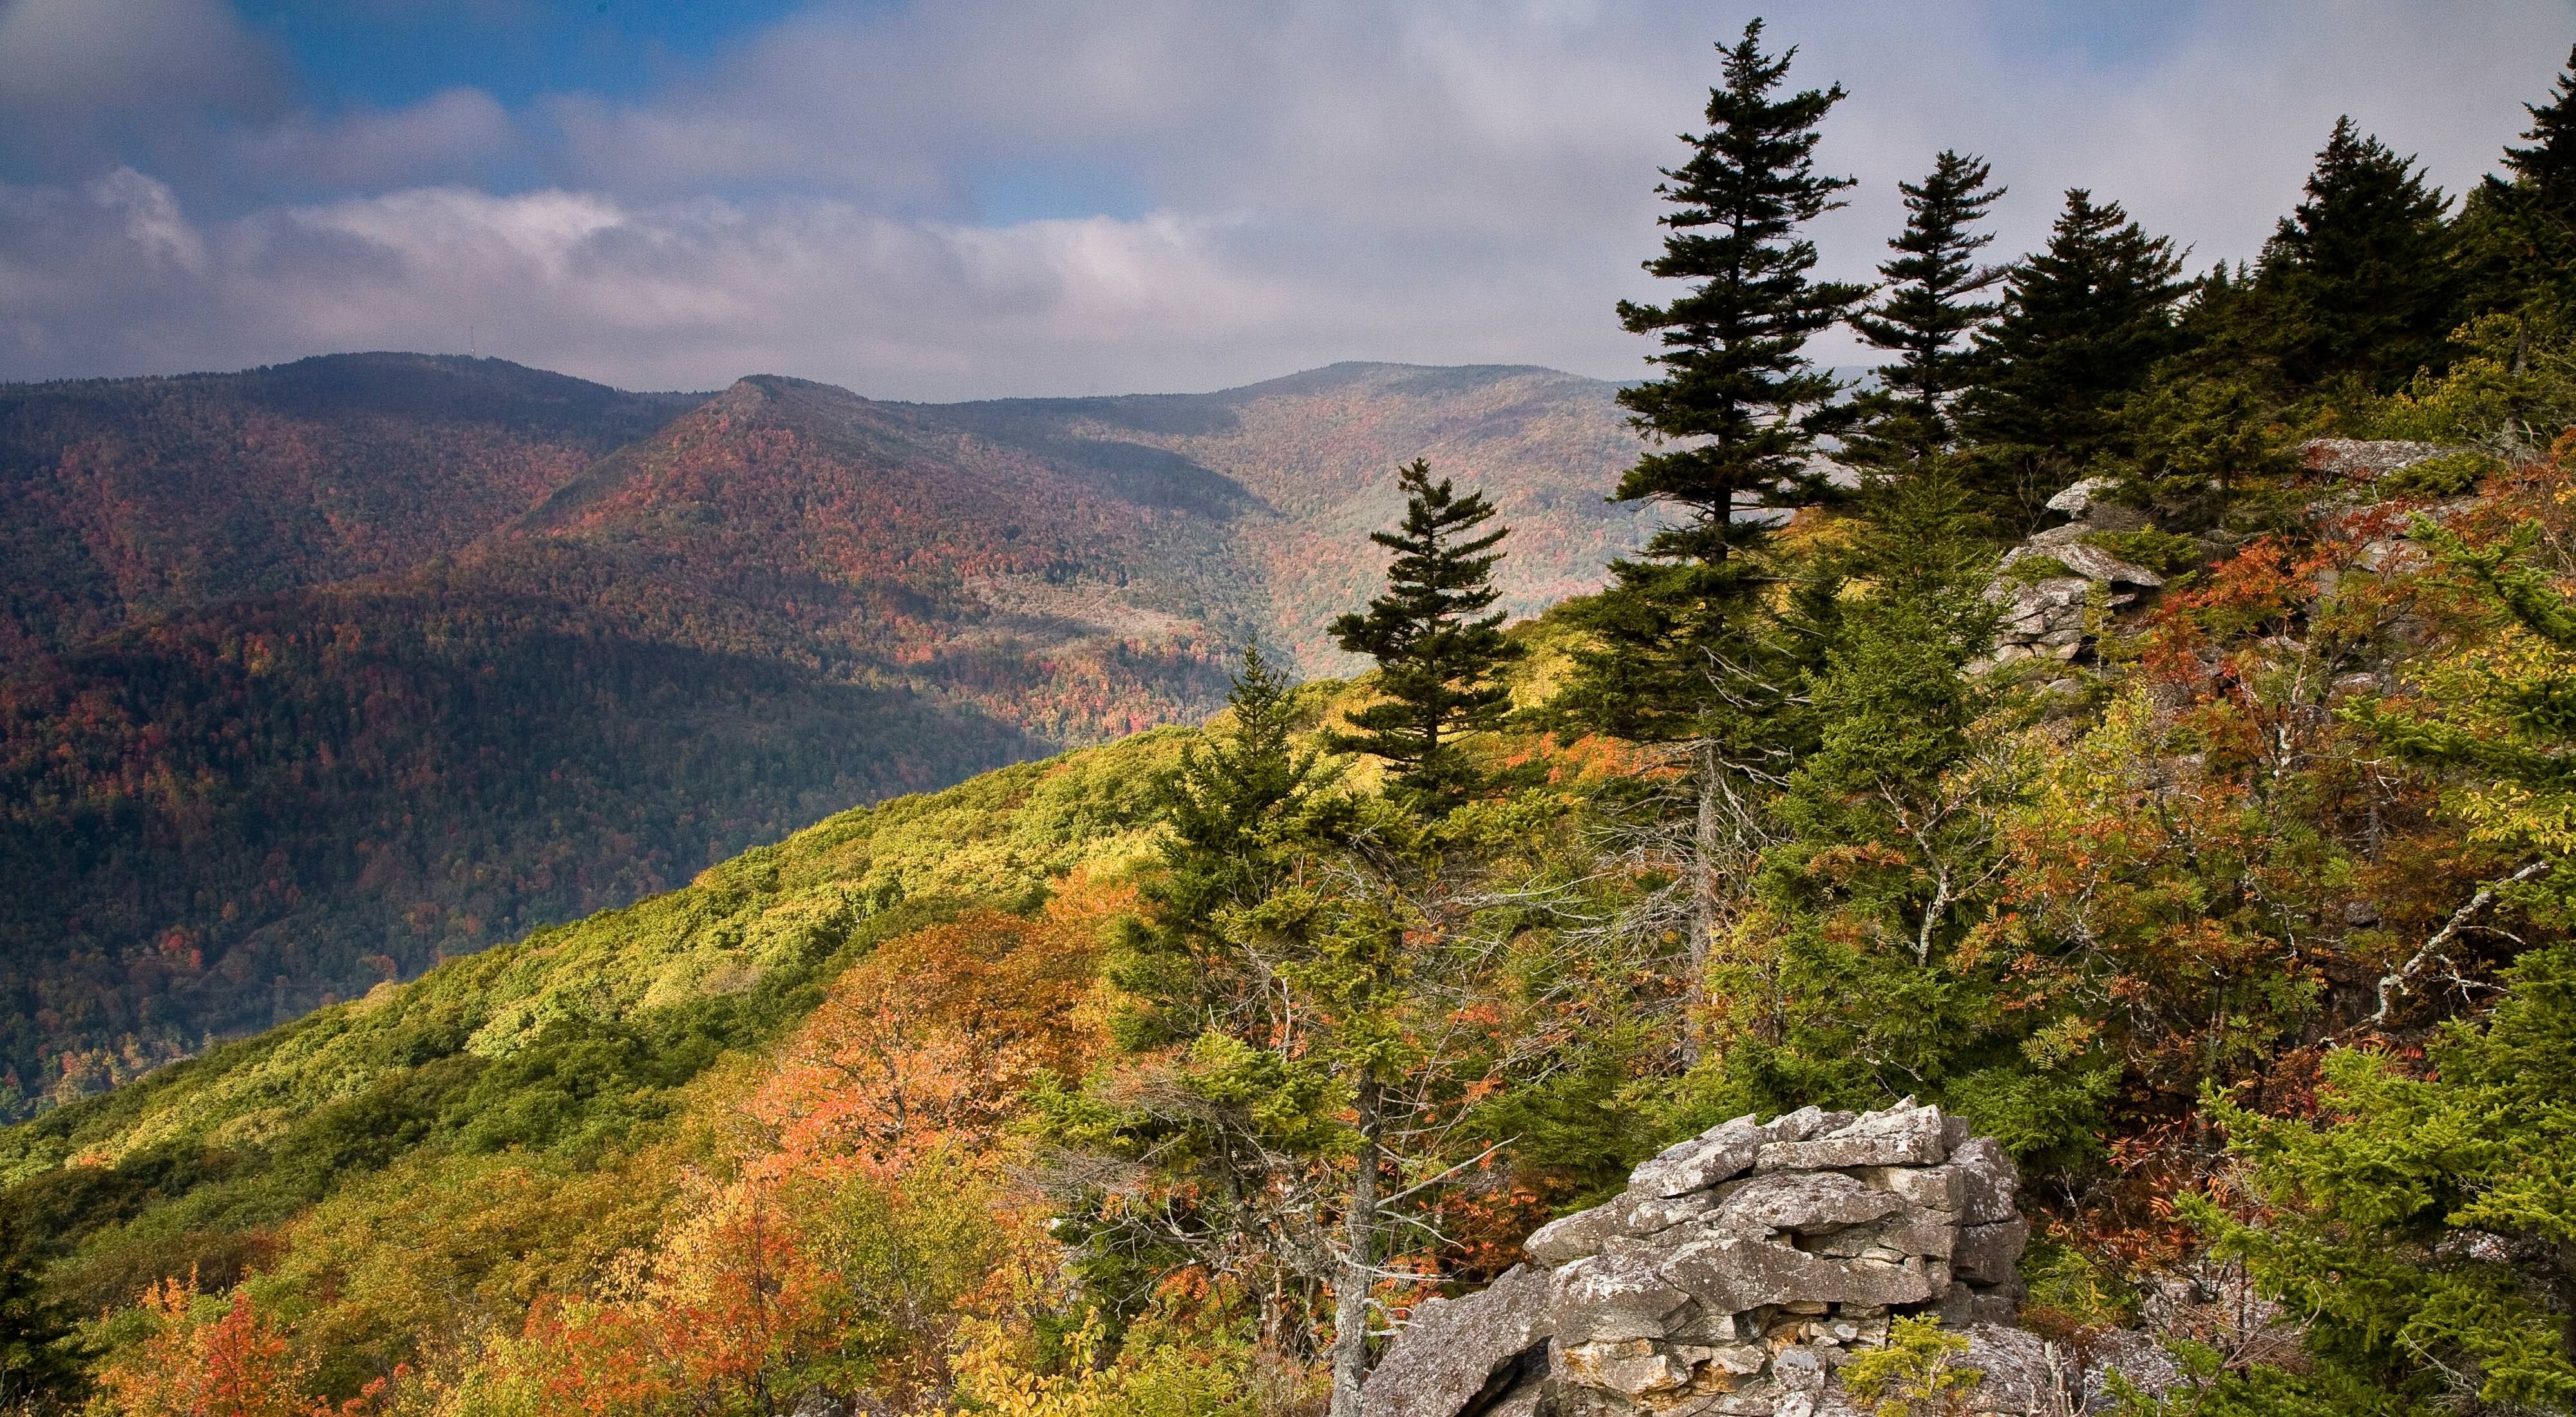 View of colorful fall colors on a mountainside at Roaring Plains West Wilderness in the Monongahela National Forest.